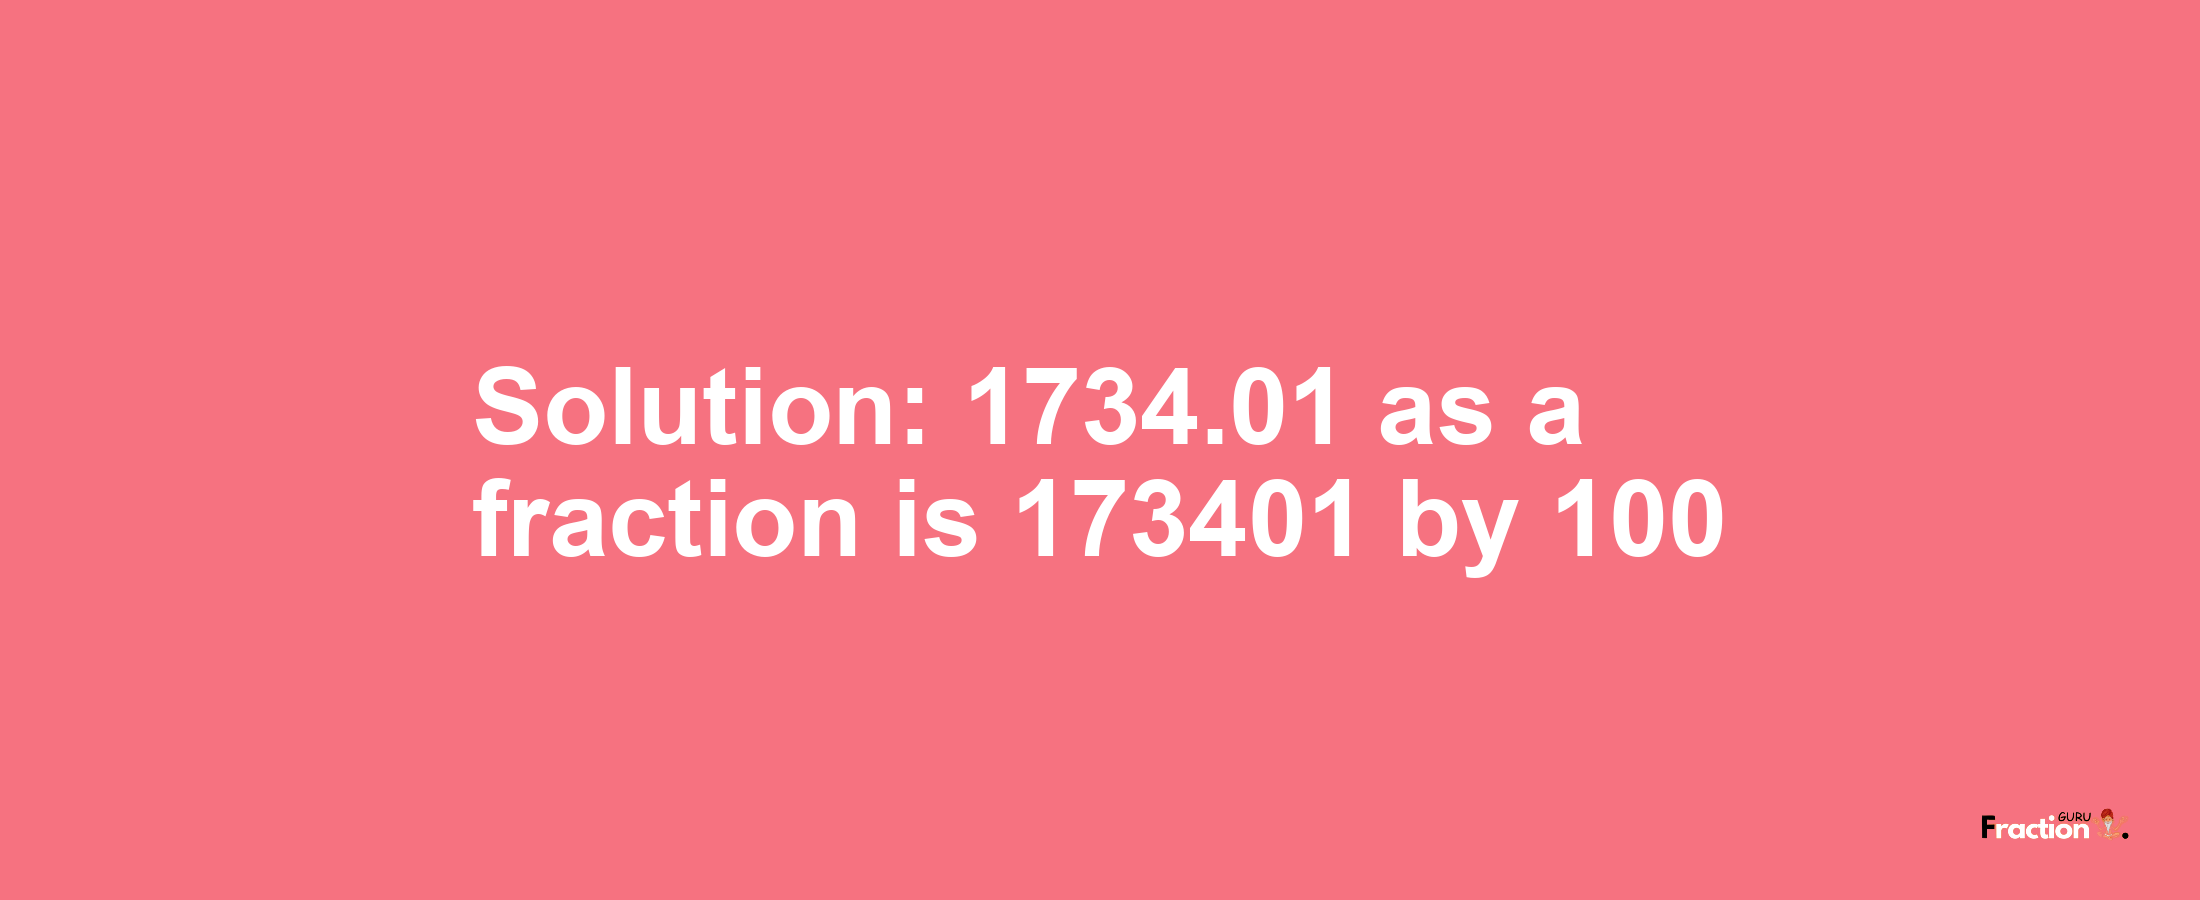 Solution:1734.01 as a fraction is 173401/100